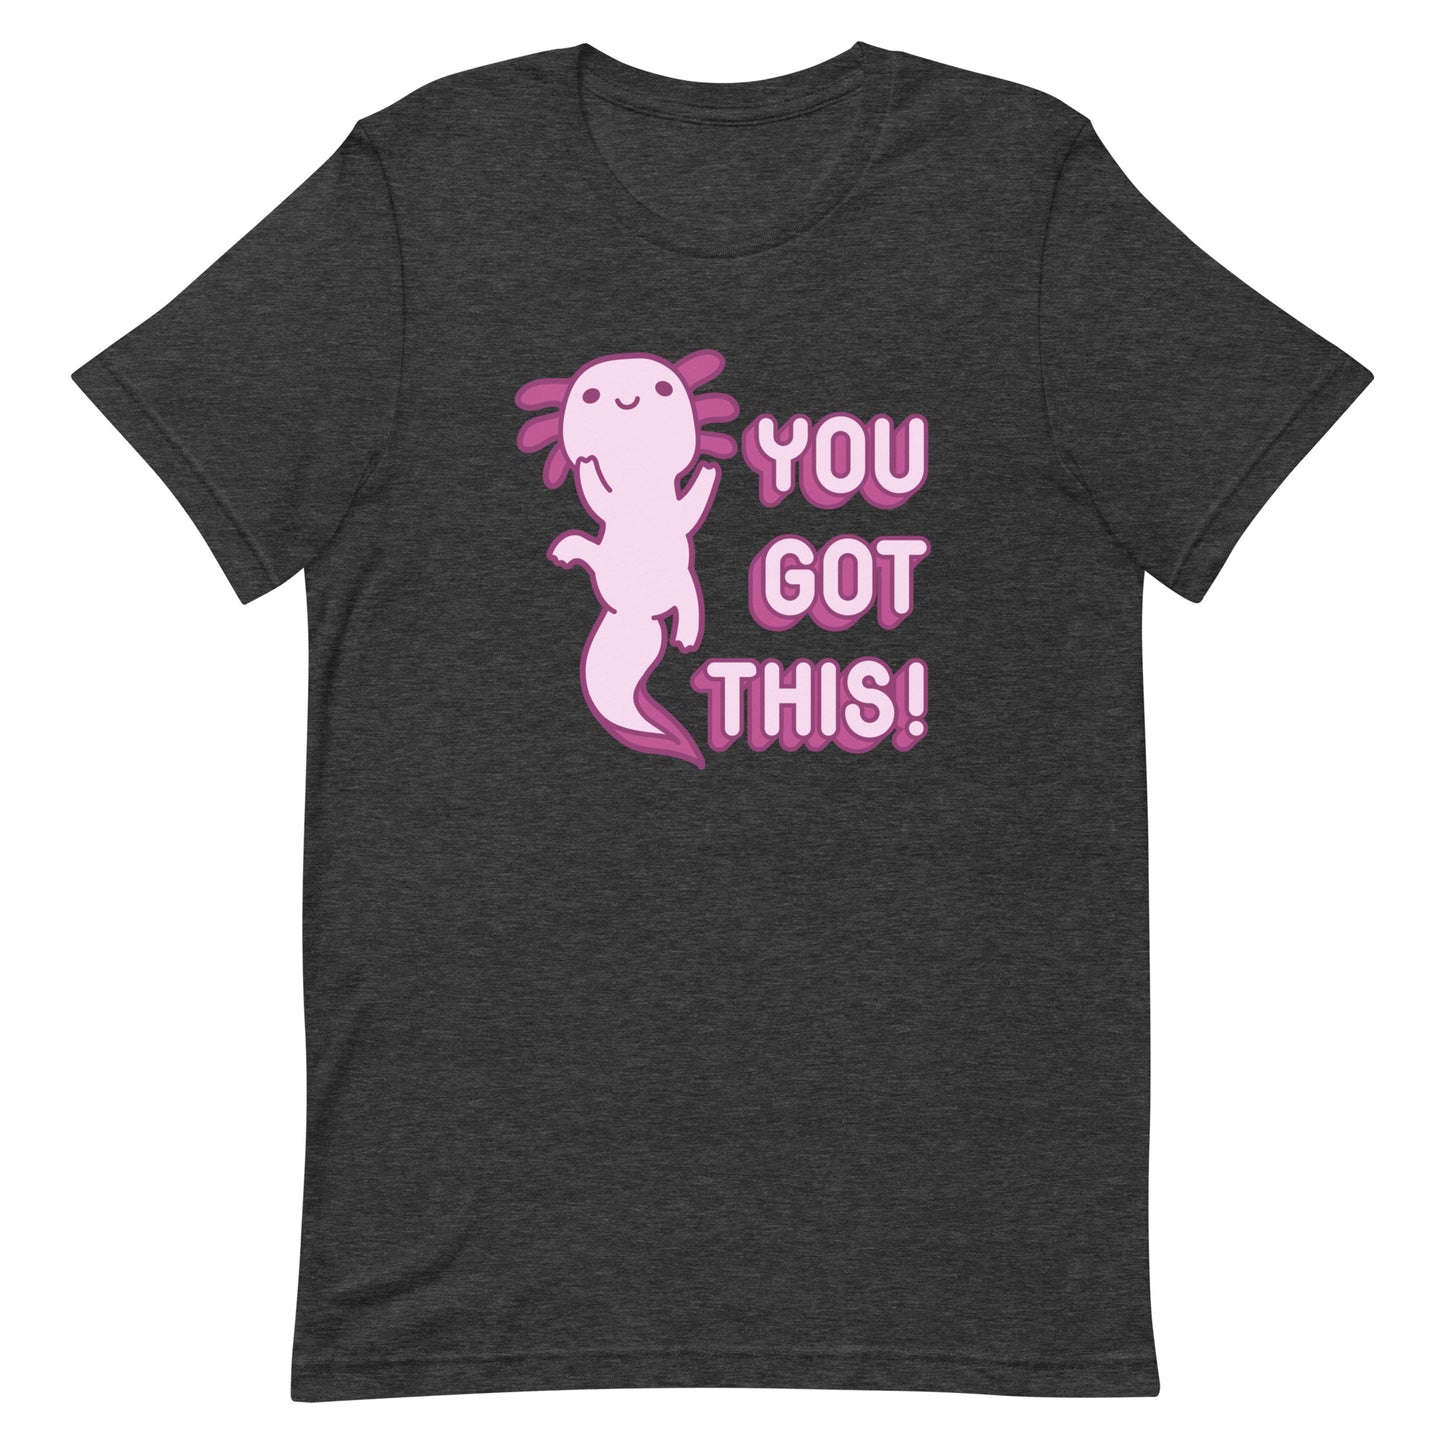 A dark heathered grey t-shirt featuring a smiling axolotl and pink bubble letters that read "You got this!"